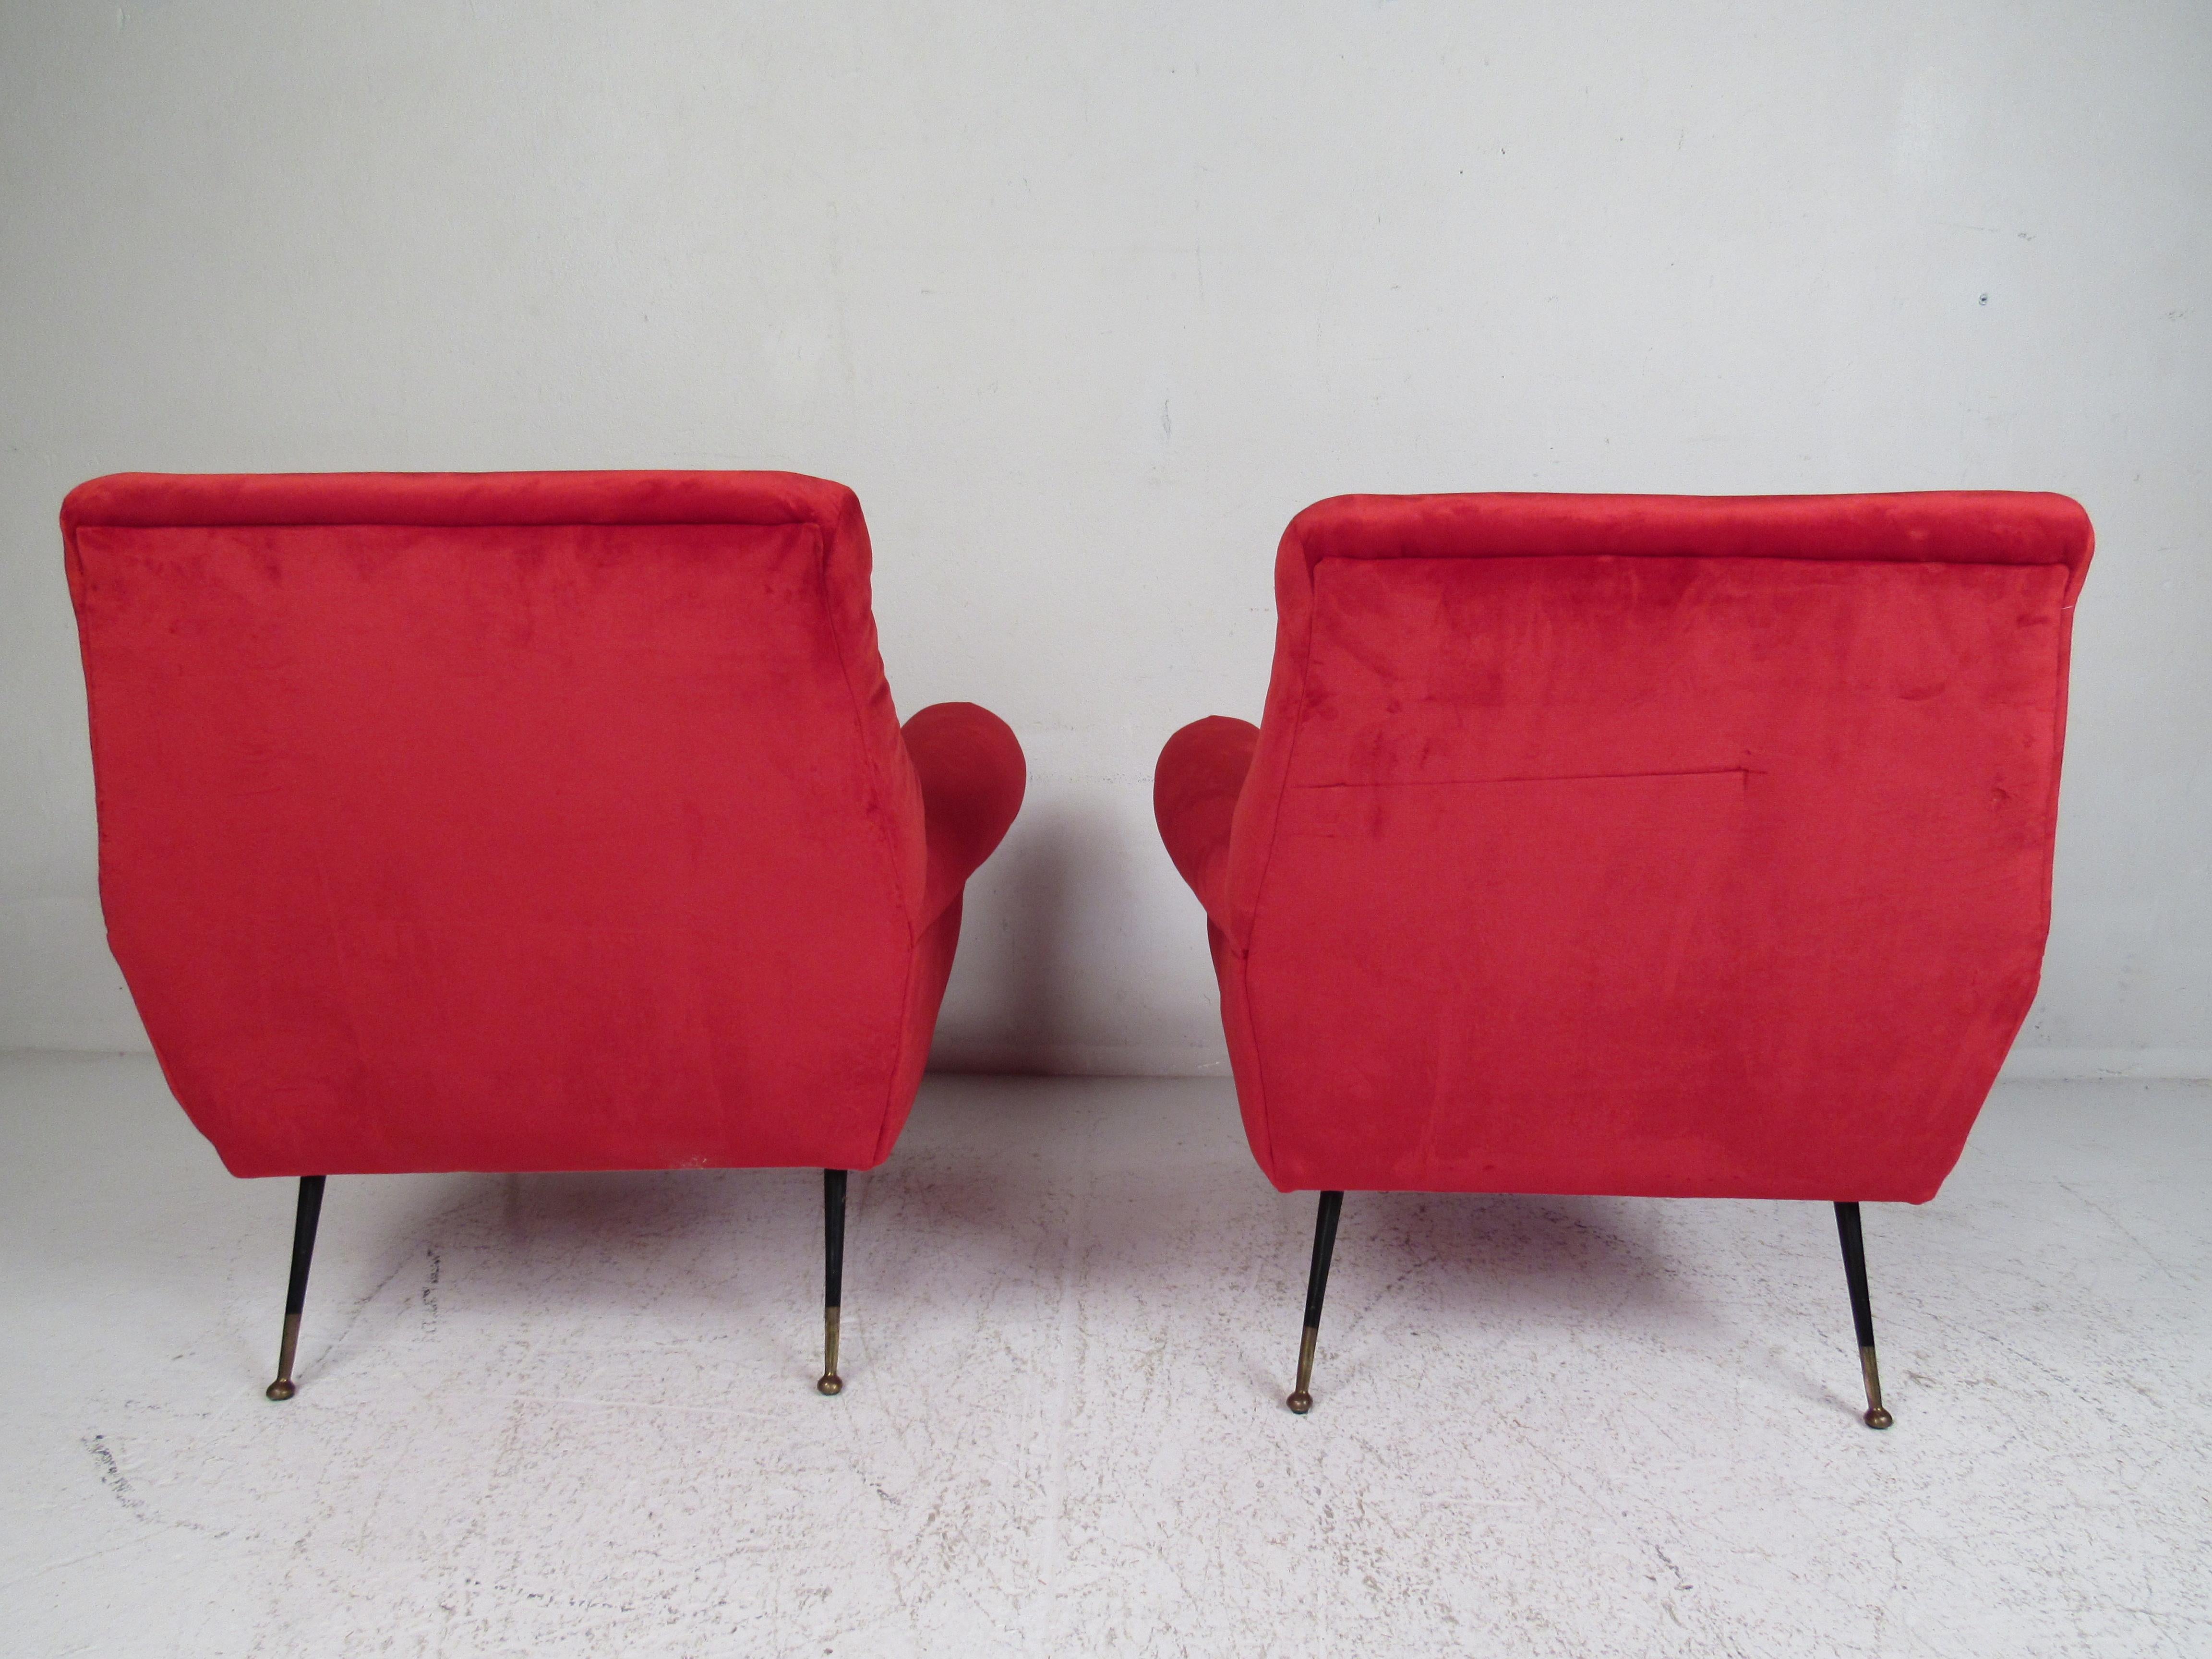 This beautiful pair of vintage modern lounge chairs feature thick padded seating covered in elegant ruby red upholstery. A sleek and comfortable low sitting design that has splayed metal legs with brass feet. The overstuffed armrests and wide